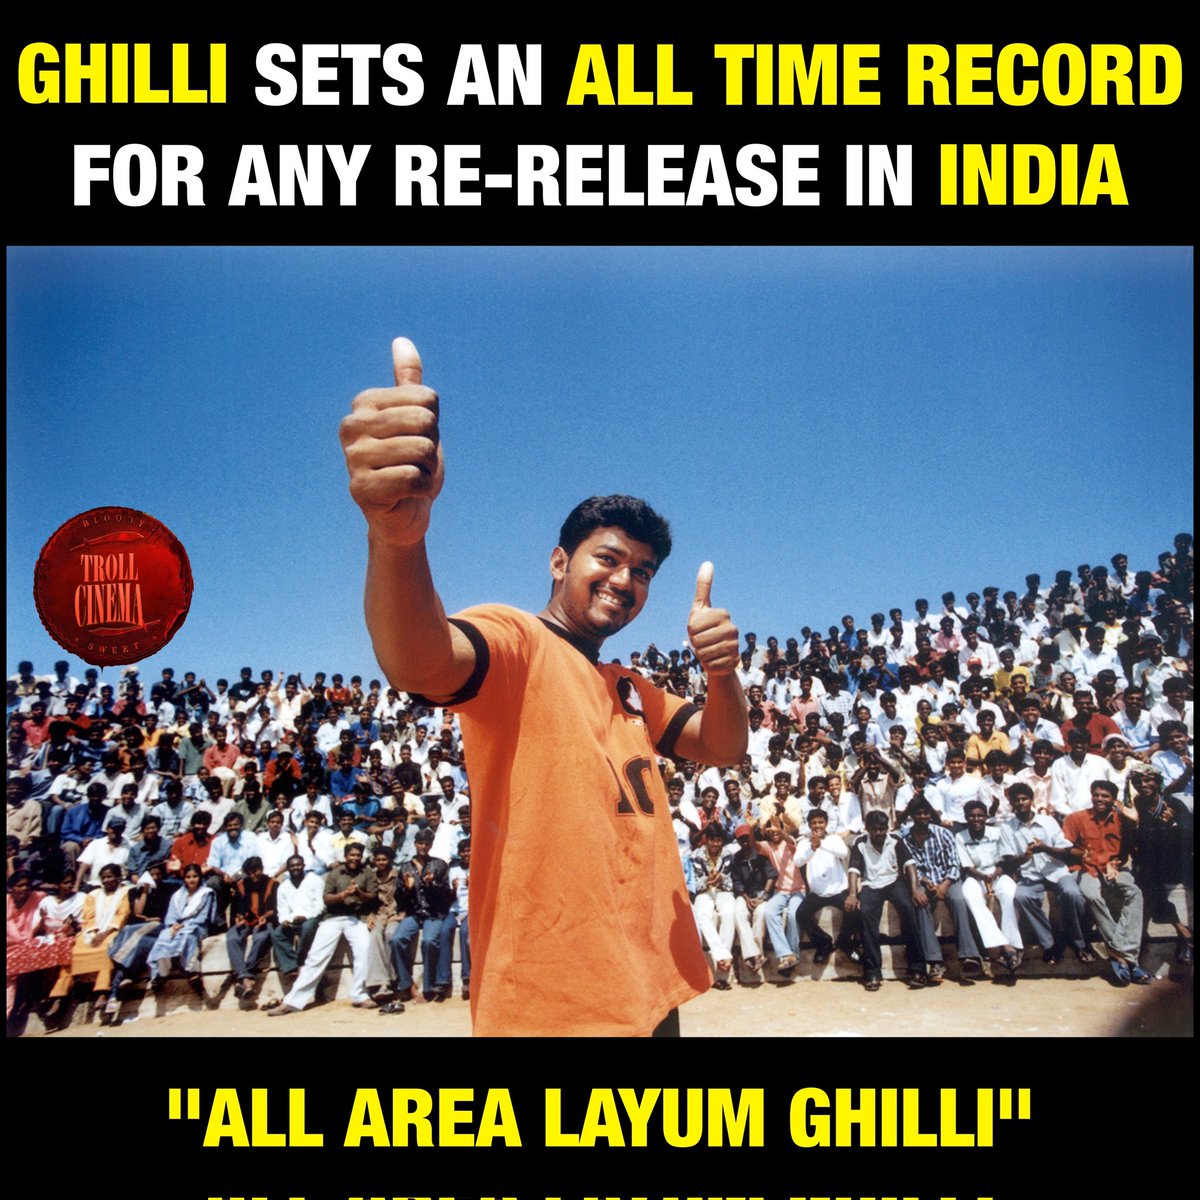 None Indian Heros would beat this Record 🤫 #Ghilli @actorvijay